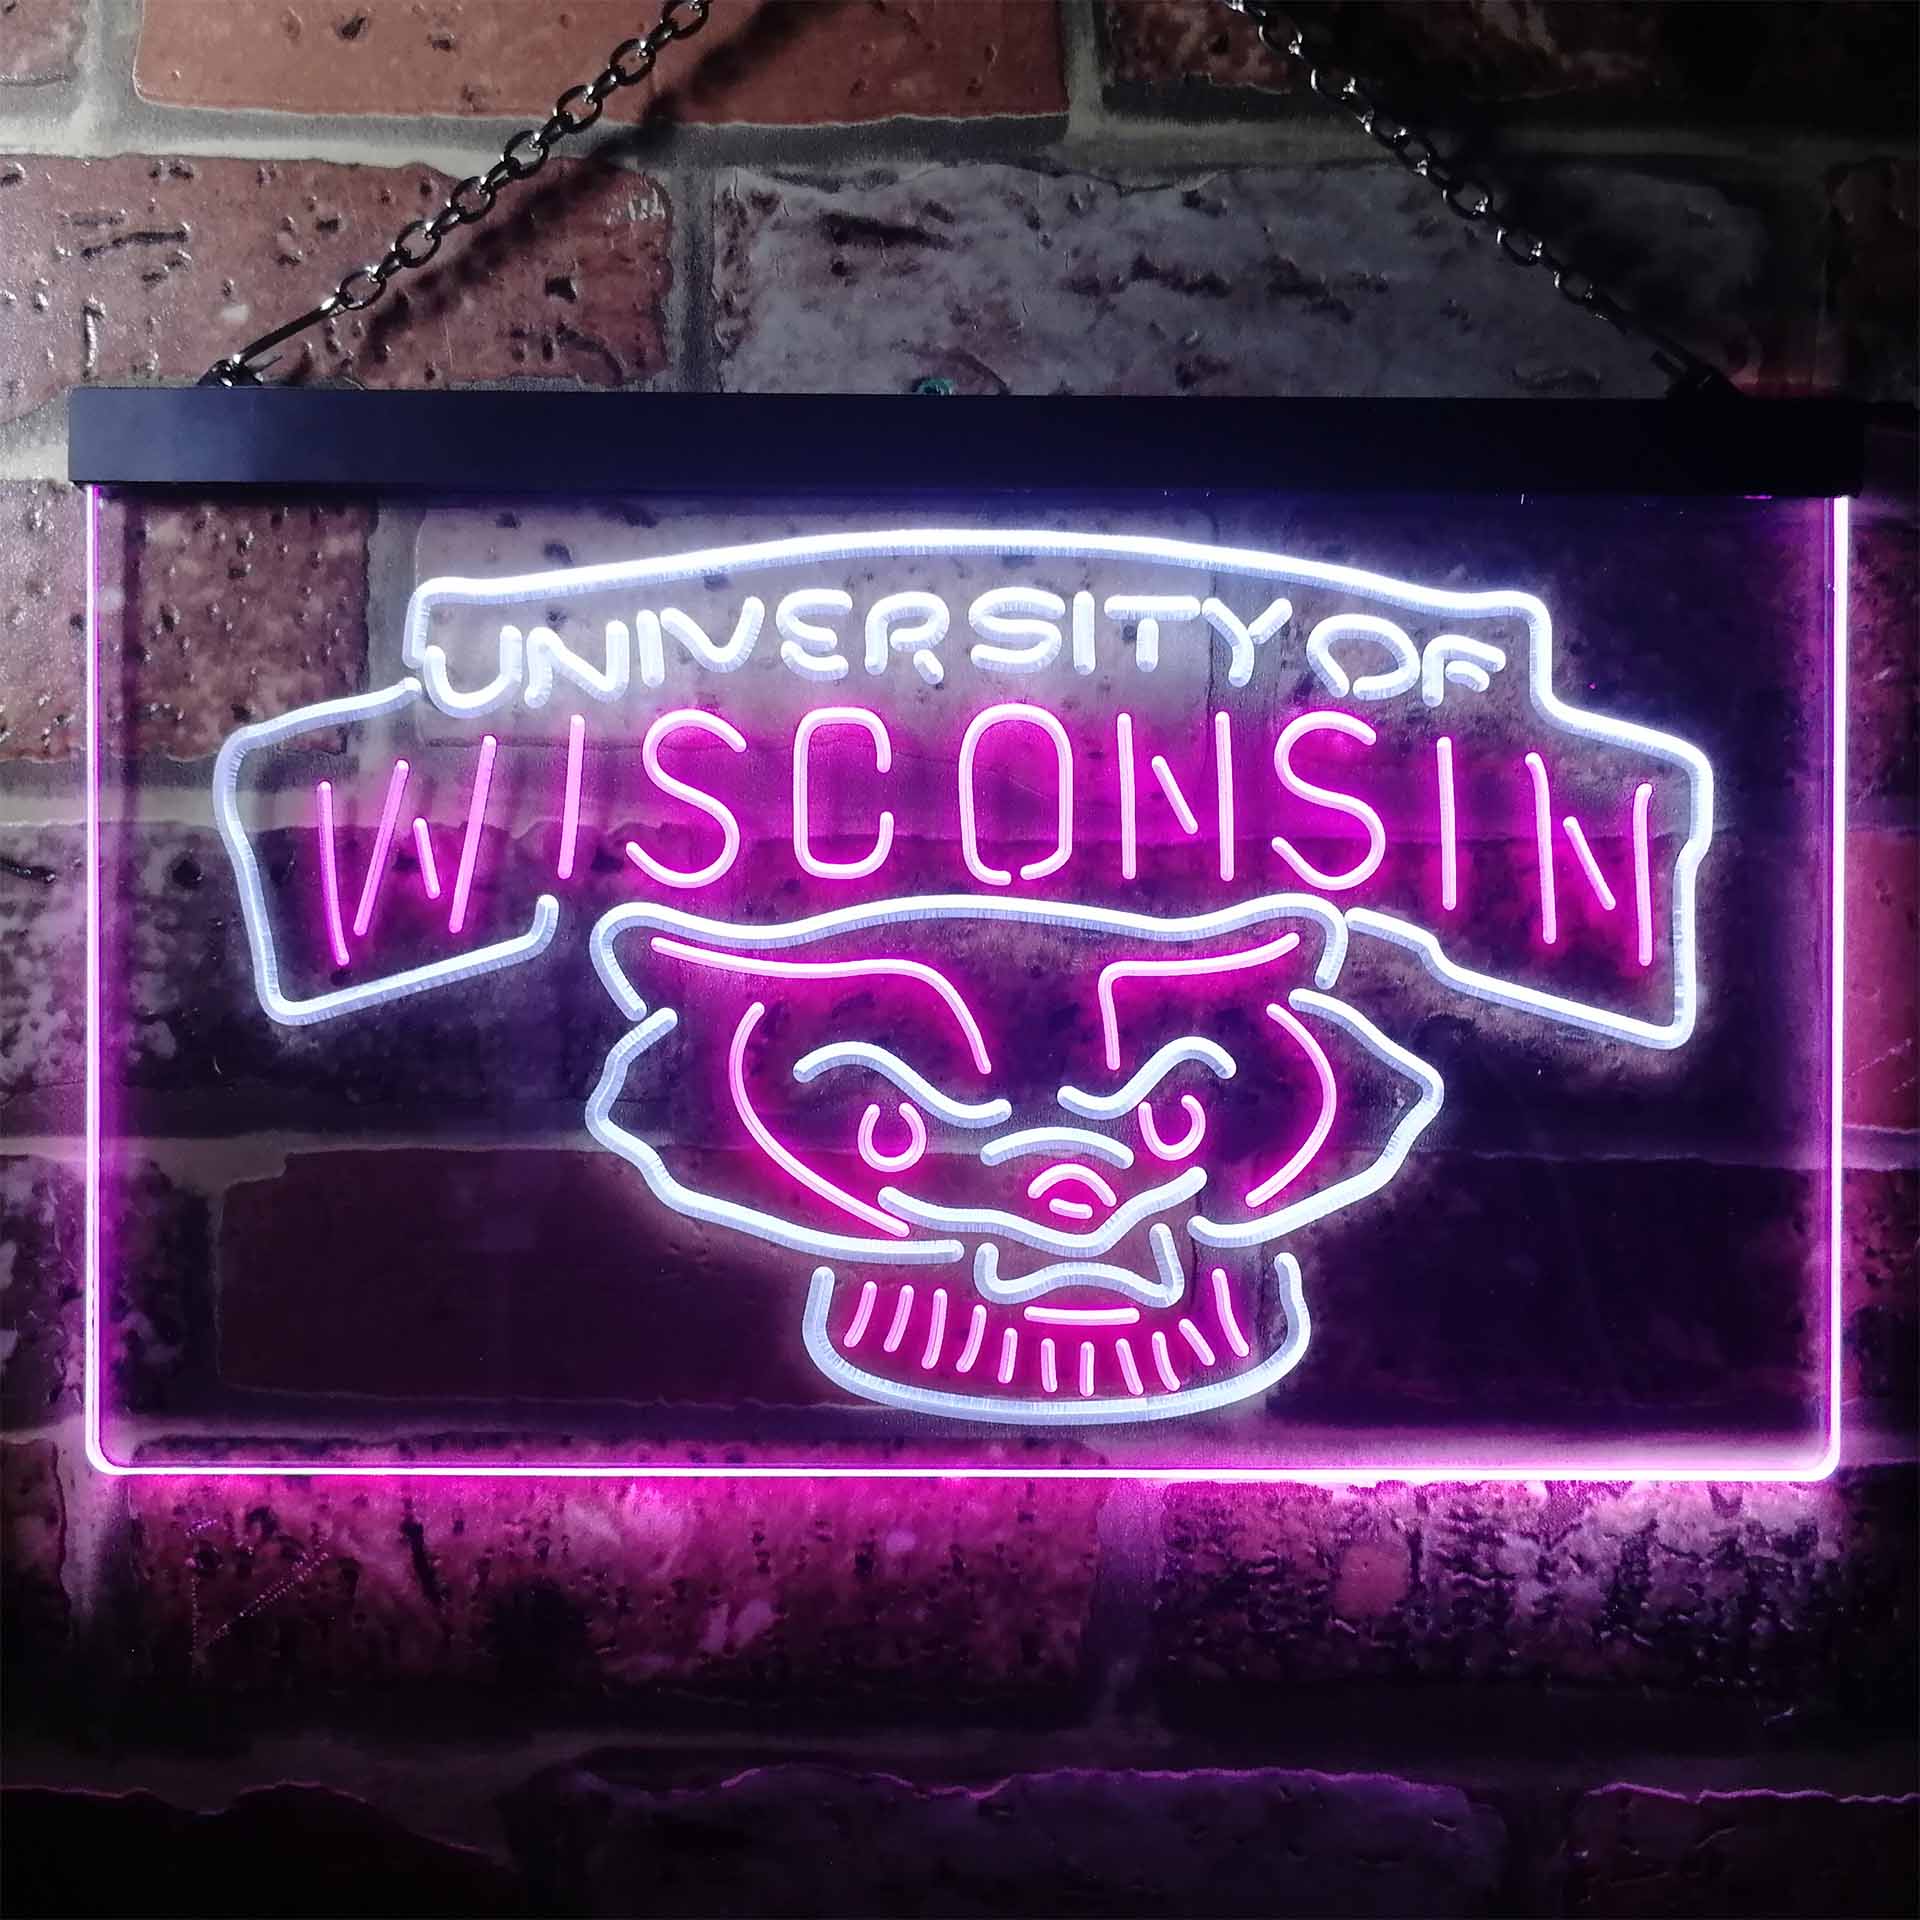 Wisconsins Badgers Sport Team Club LED Neon Sign